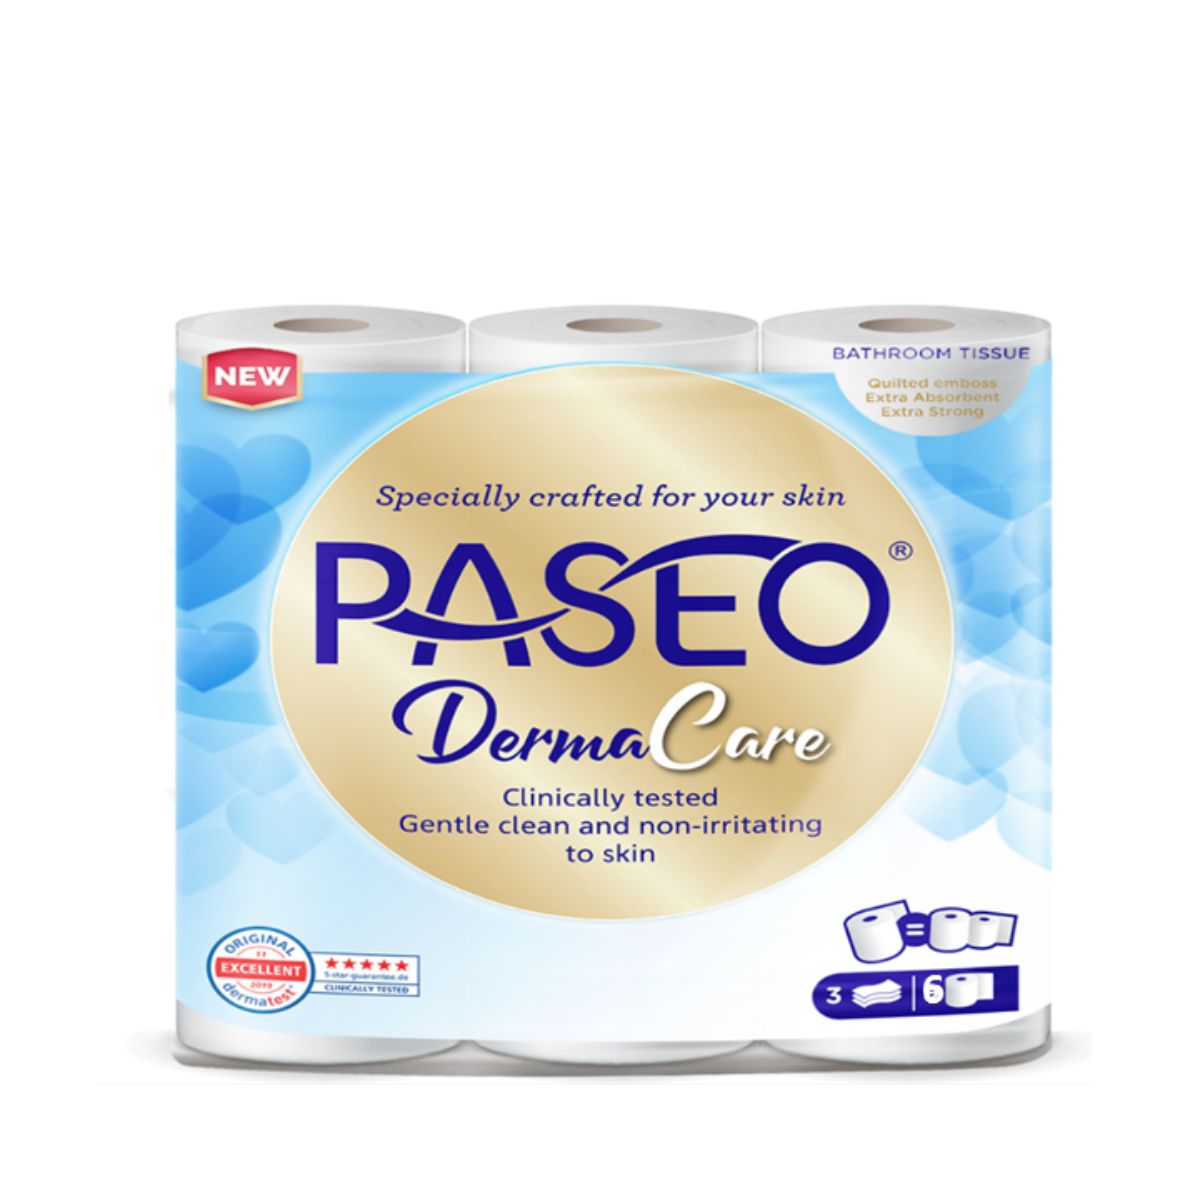 Paseo - Derma Care - Clinically Tested Gentle Clean And Non-irritating To Skin - Tissue Paper - 1pcs